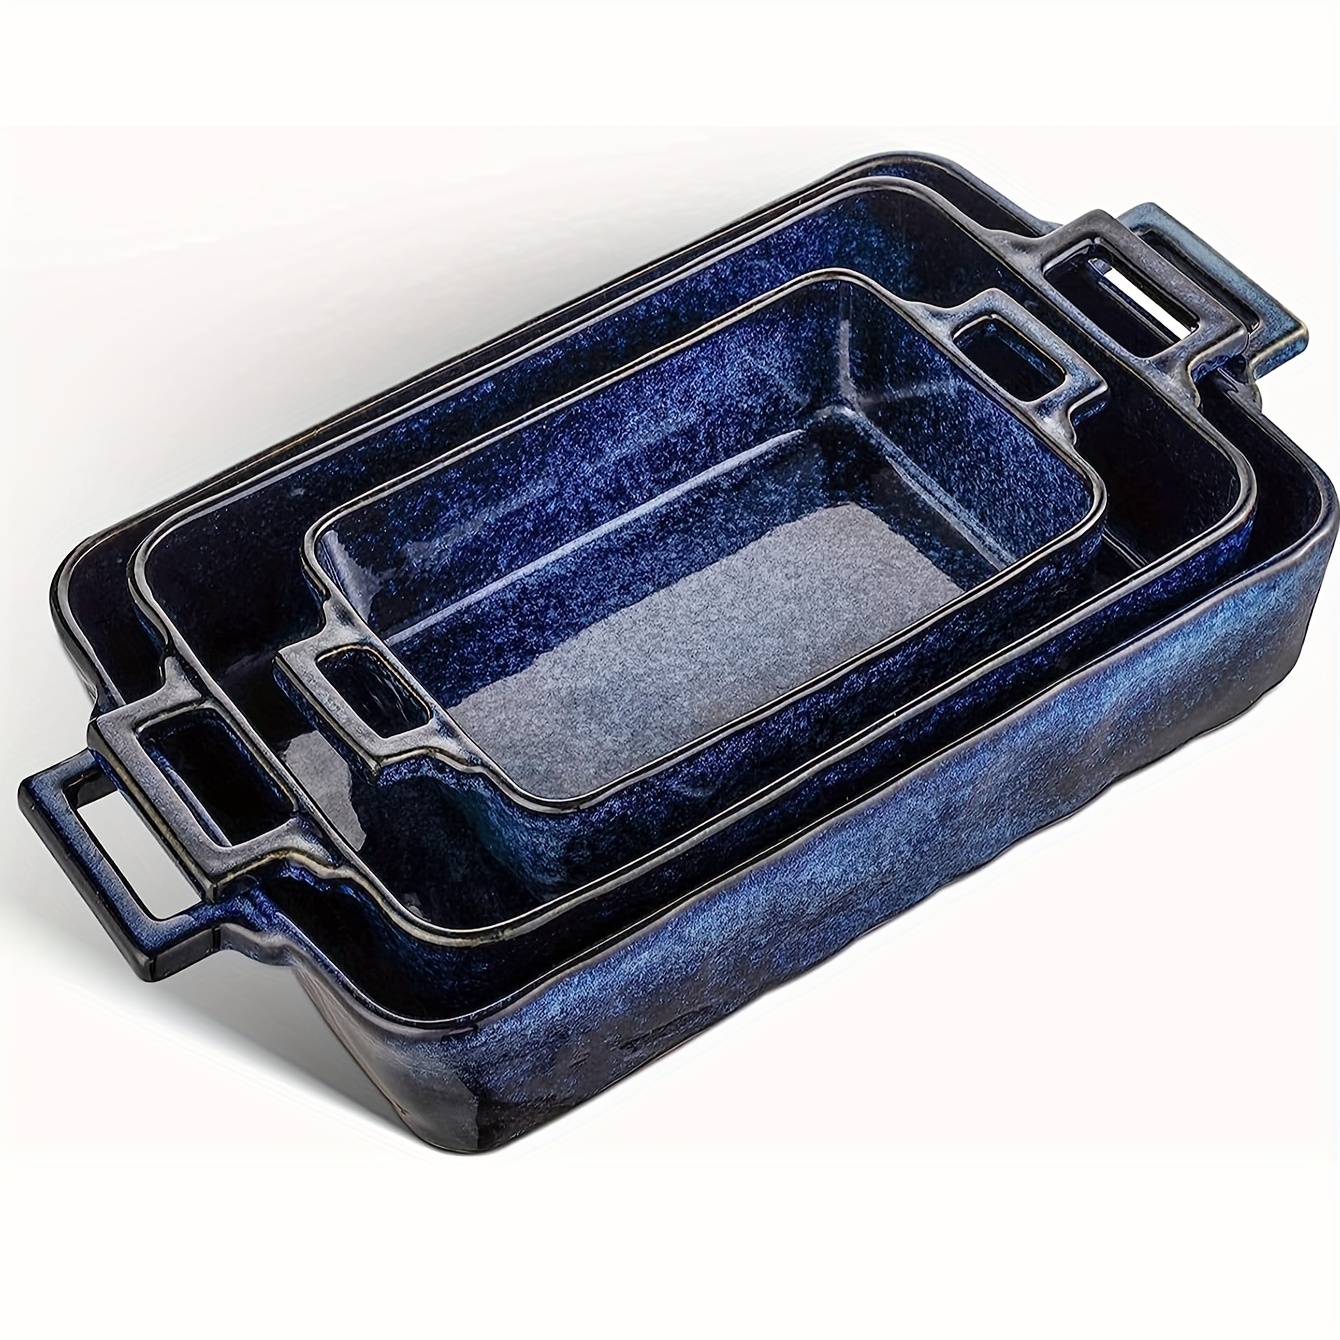 

Vicrays Ceramic Bakeware Set, Porcelain Rectangular Lasagna Pans Casserole Dish Set For Kitchen, Cooking, Baking, Cake Dinner, Banquet And Daily Use, 3 Pcs, 15 X 8.5 Inches (blue)